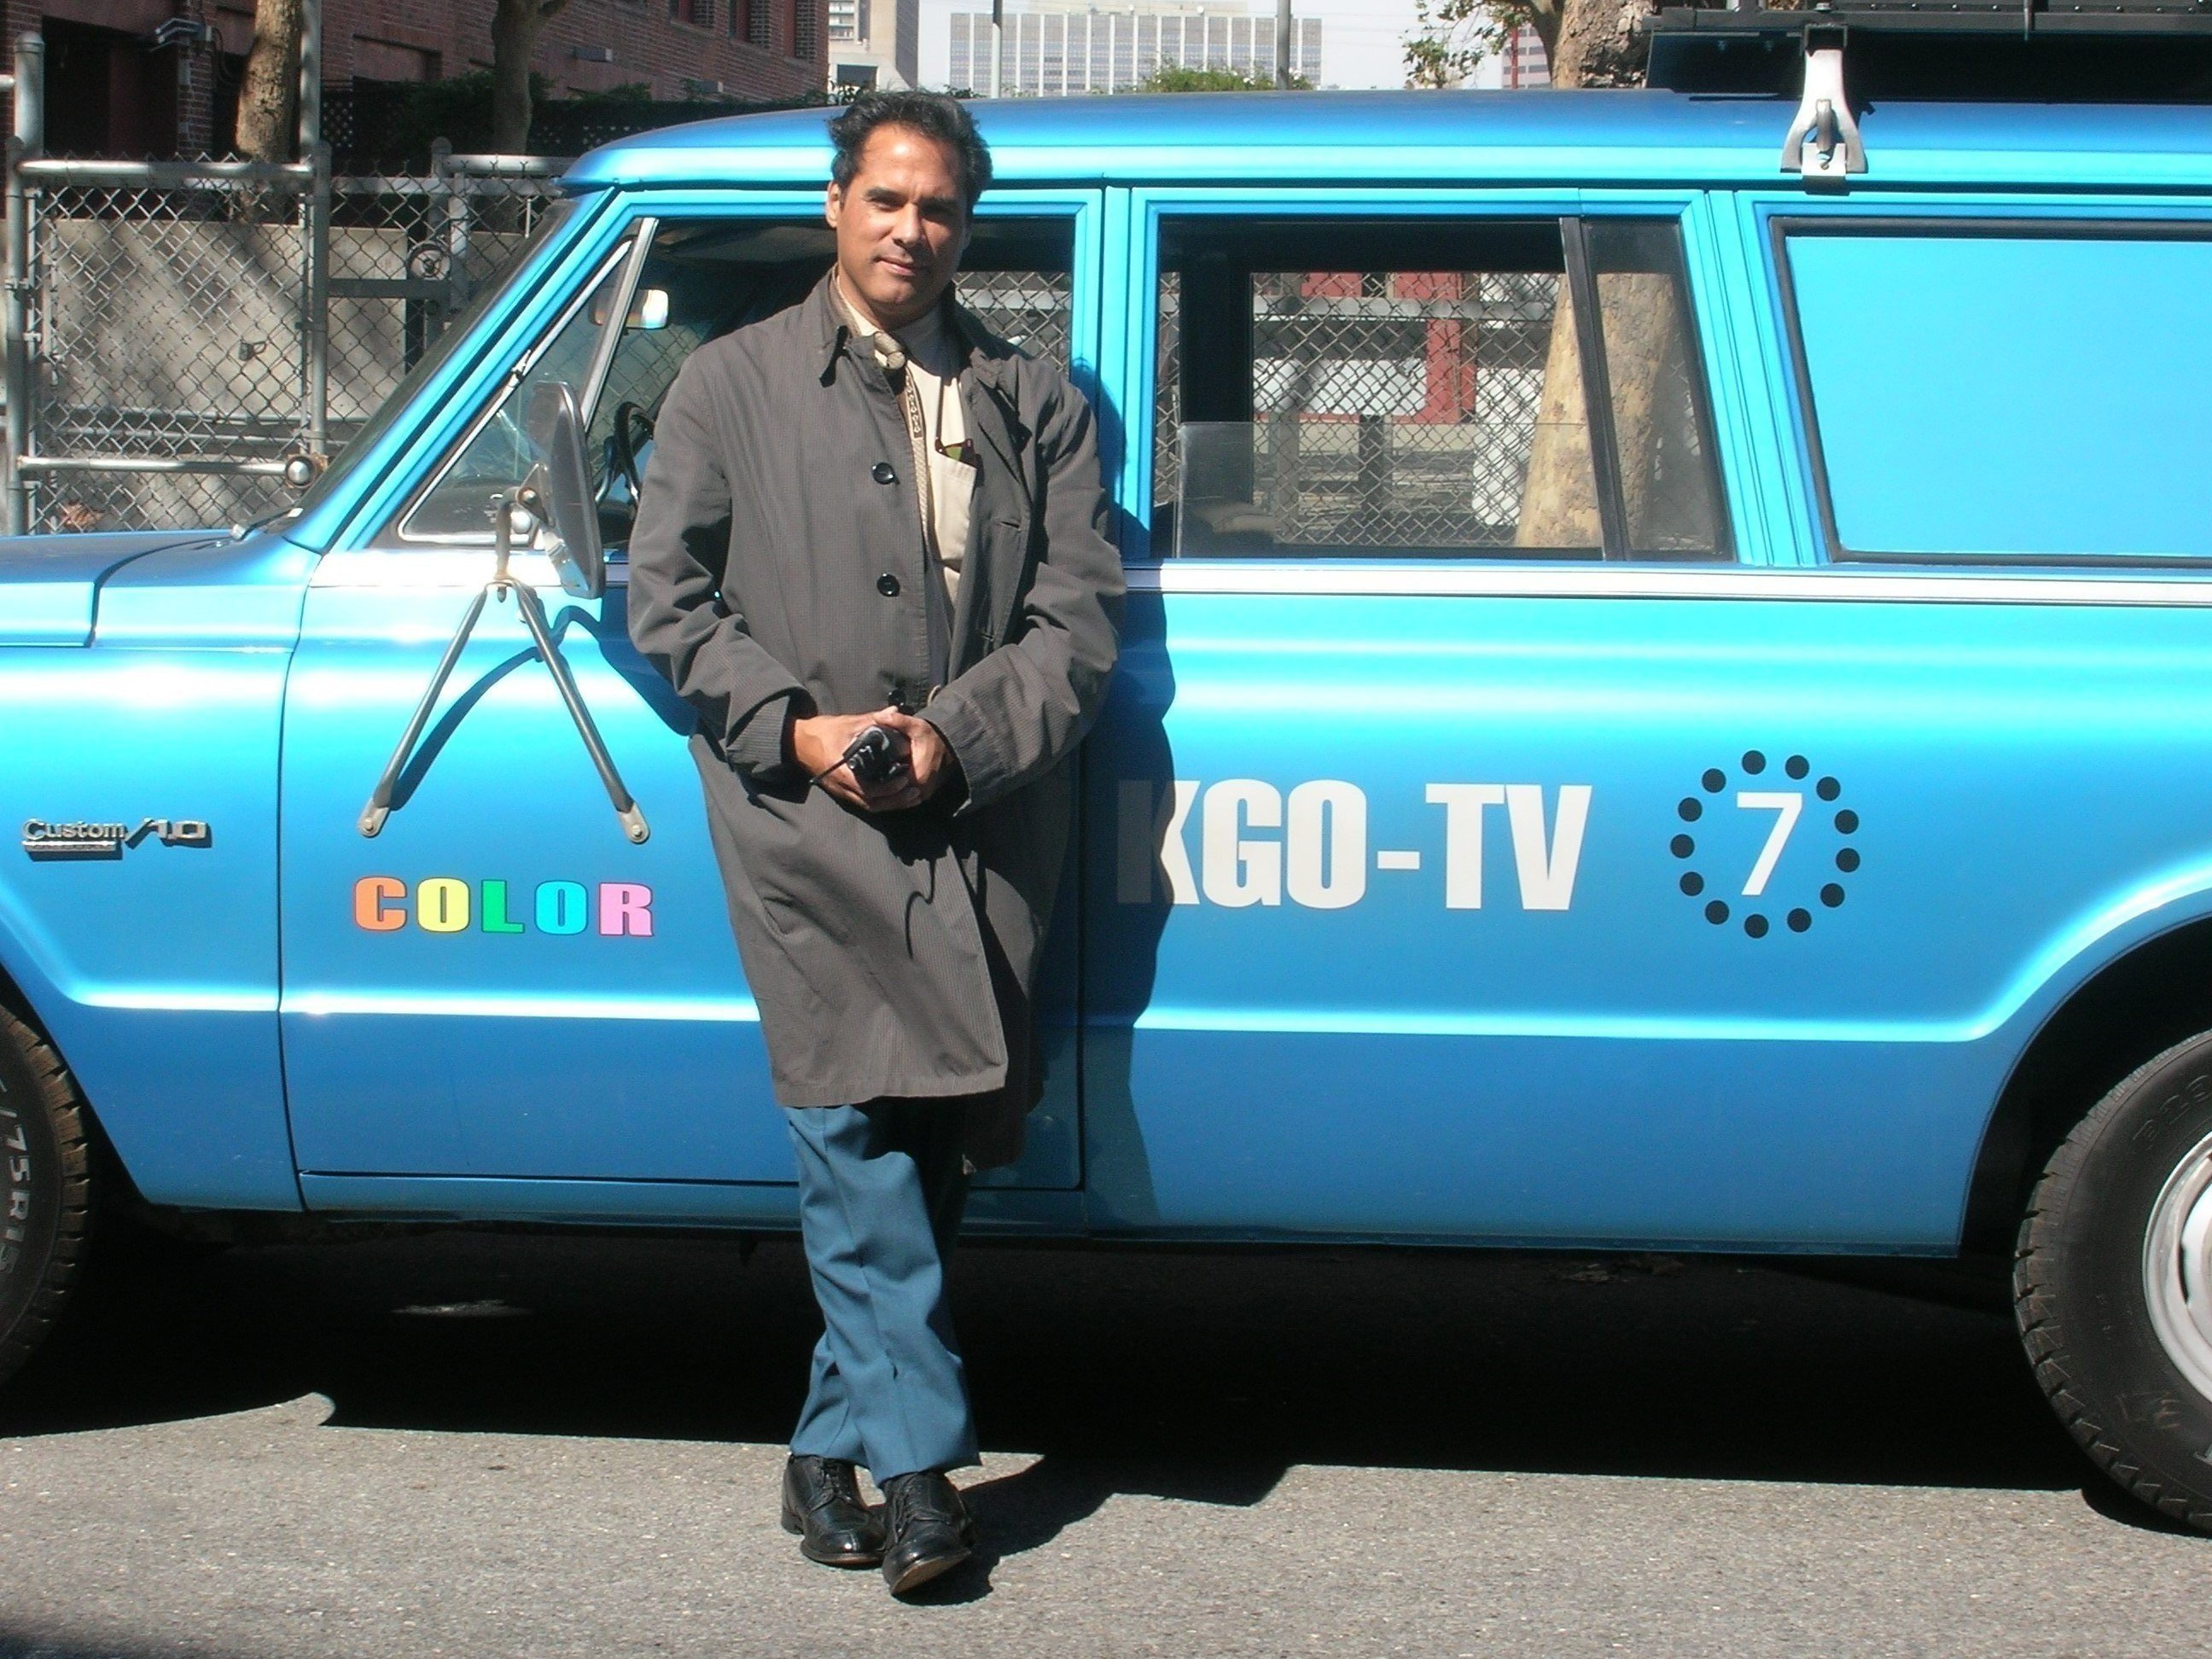 During Break on Zodiac / multiple vintage vehicles driven during two week shoot